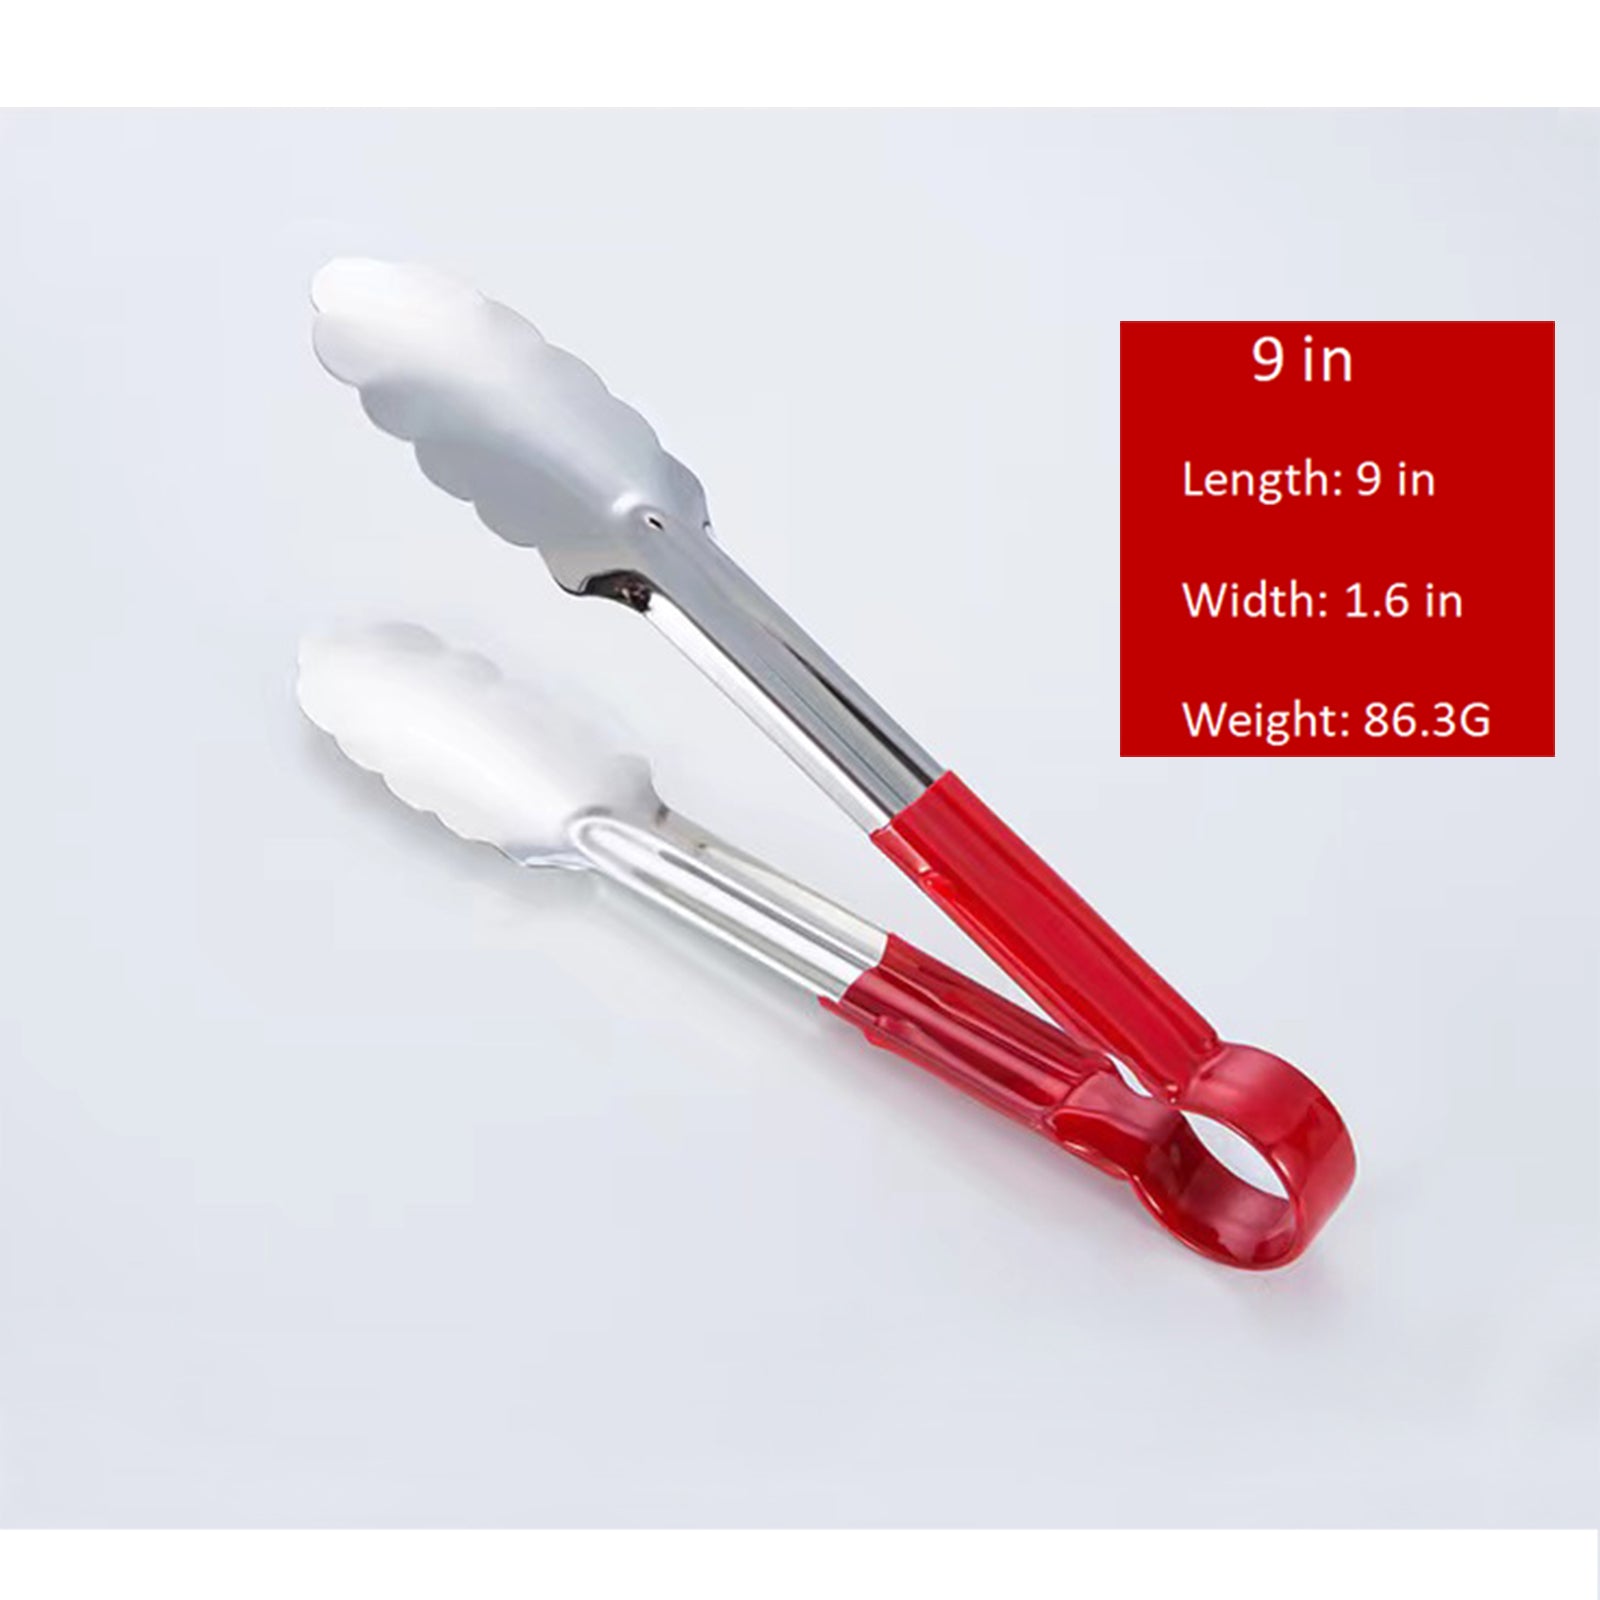 Kitchen Food Tongs - 7 Mini Silicone Serving Tongs - Set of 3